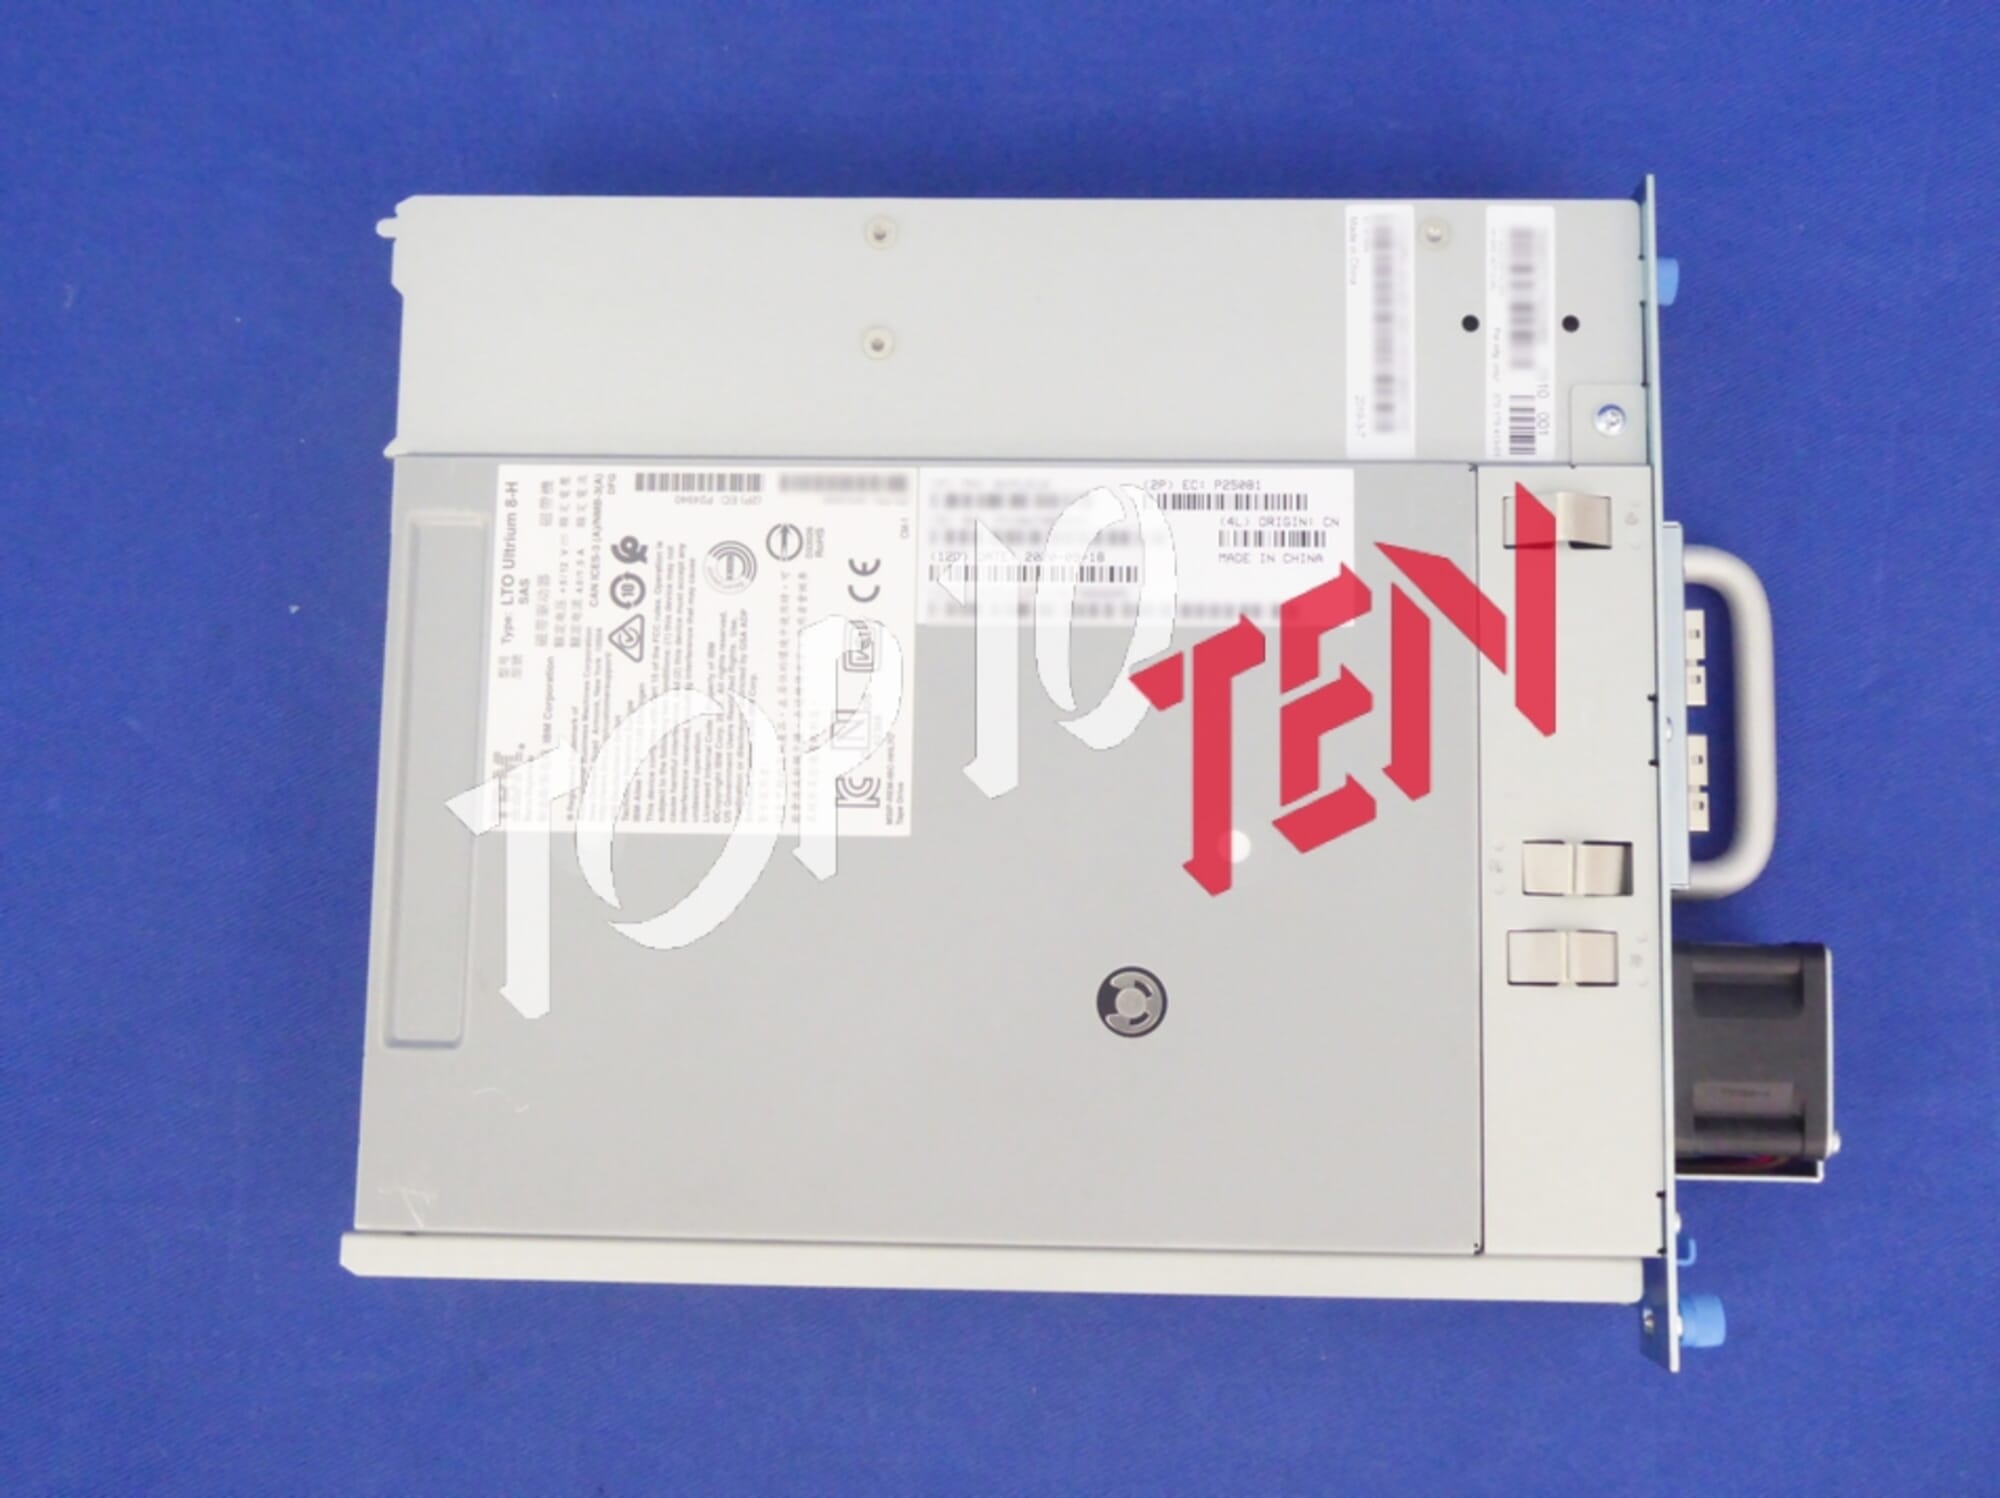 IBM 3555-AGKN LTO-8 HH SAS Tape Drive with Caddy for TS4300 